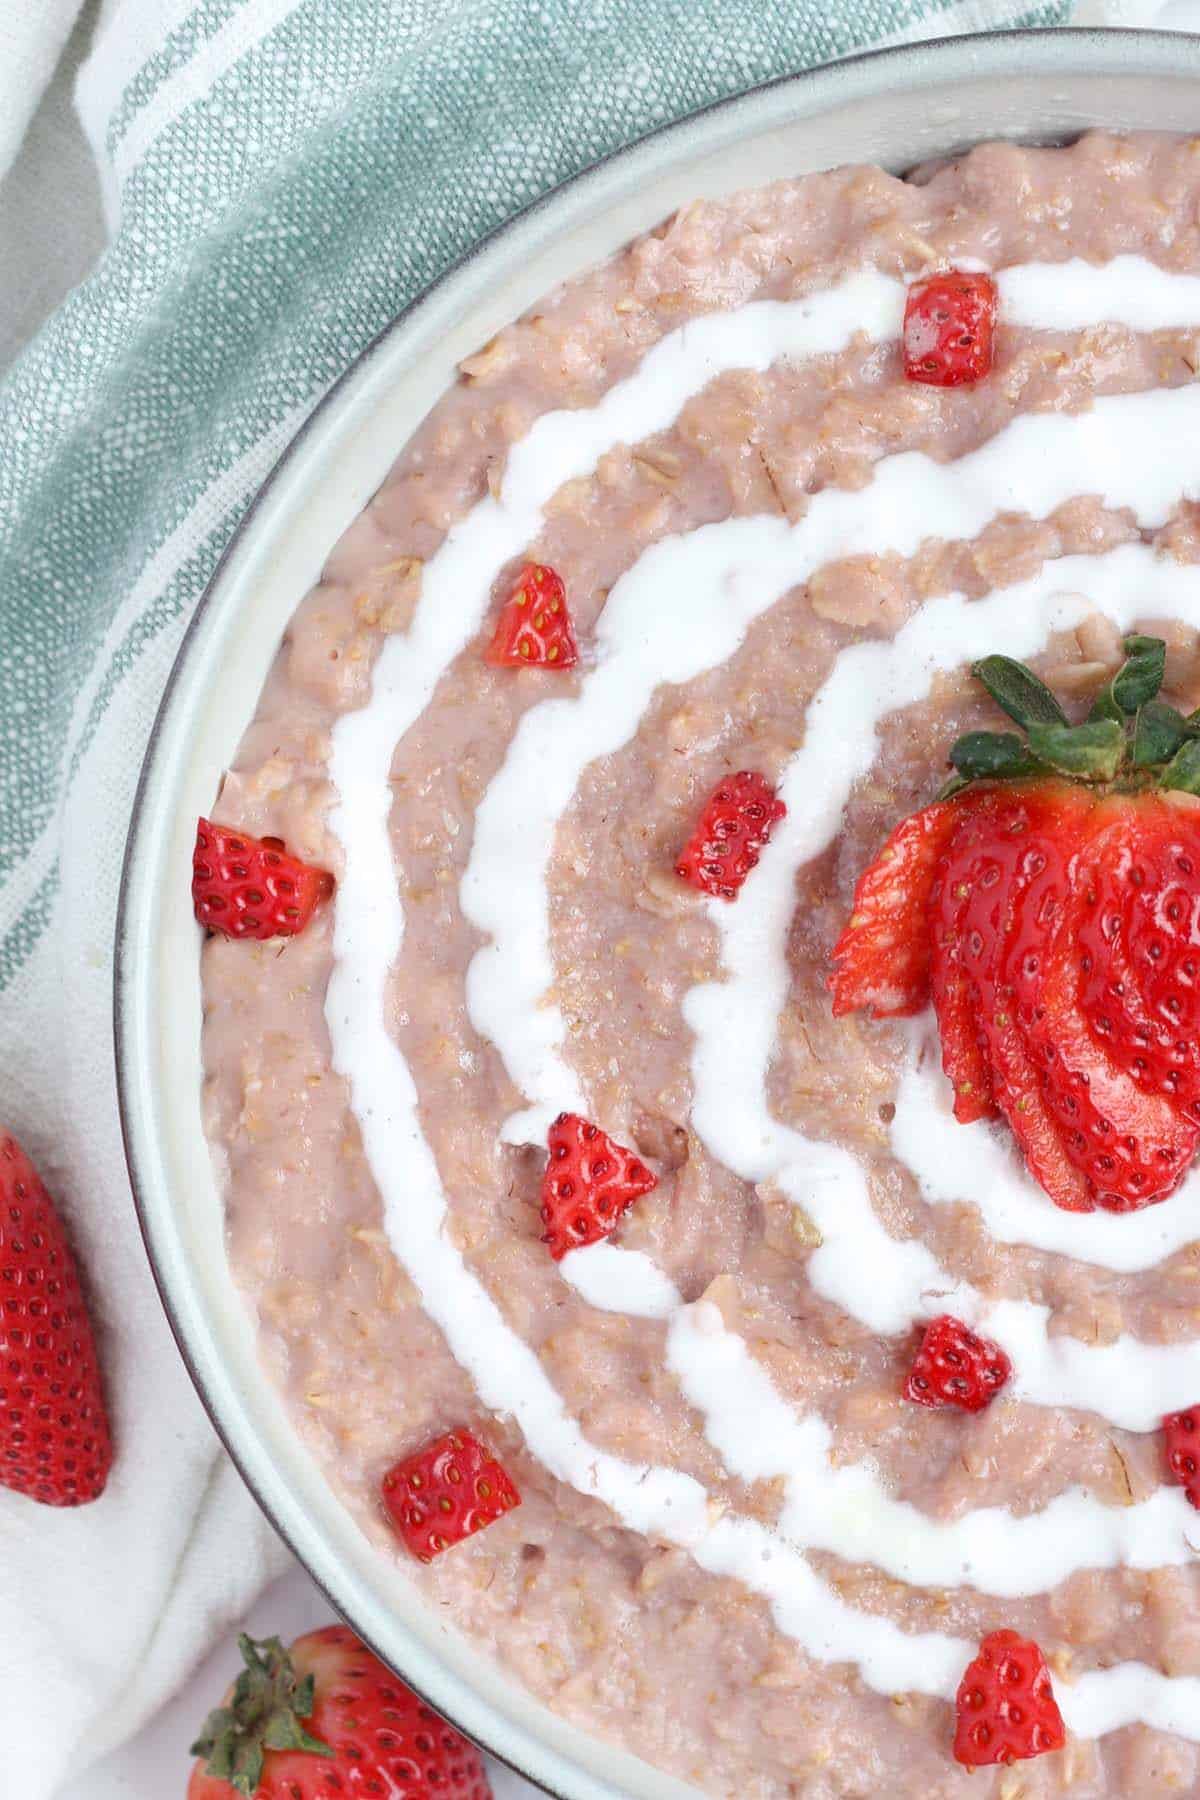 a serving of oatmeal topped with chopped strawberries and cream